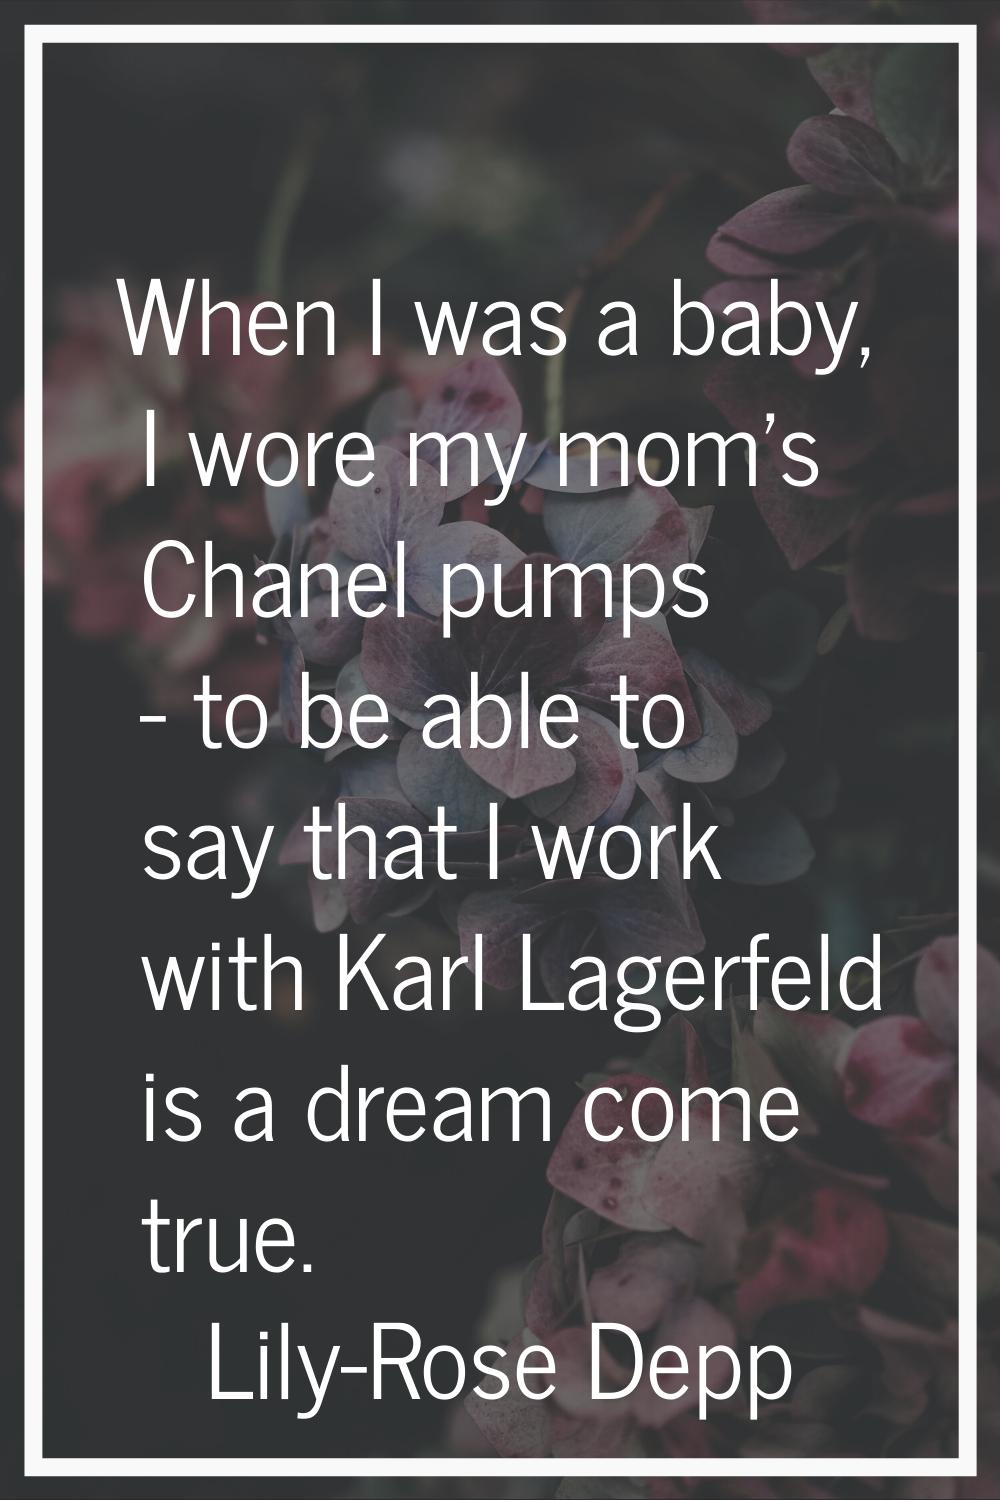 When I was a baby, I wore my mom's Chanel pumps - to be able to say that I work with Karl Lagerfeld